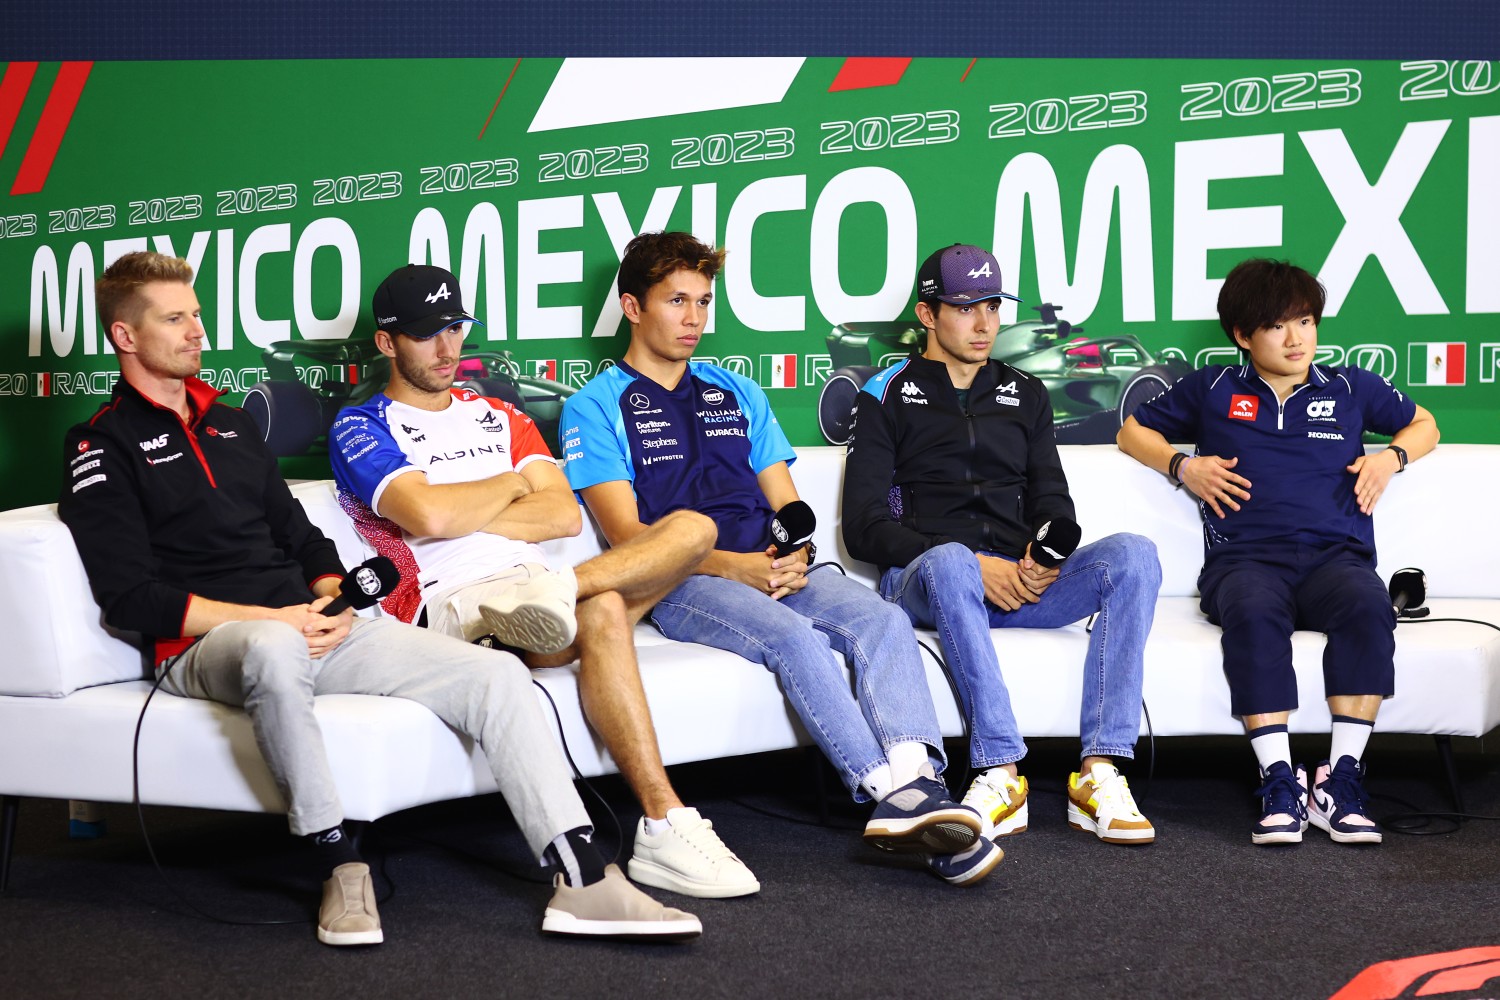 Nico Hulkenberg of Germany and Haas F1, Pierre Gasly of France and Alpine F1, Alexander Albon of Thailand and Williams, Esteban Ocon of France and Alpine F1 and Yuki Tsunoda of Japan and Scuderia AlphaTauri attend the Drivers Press Conference during previews ahead of the F1 Grand Prix of Mexico at Autodromo Hermanos Rodriguez on October 26, 2023 in Mexico City, Mexico. (Photo by Dan Istitene/Getty Images)